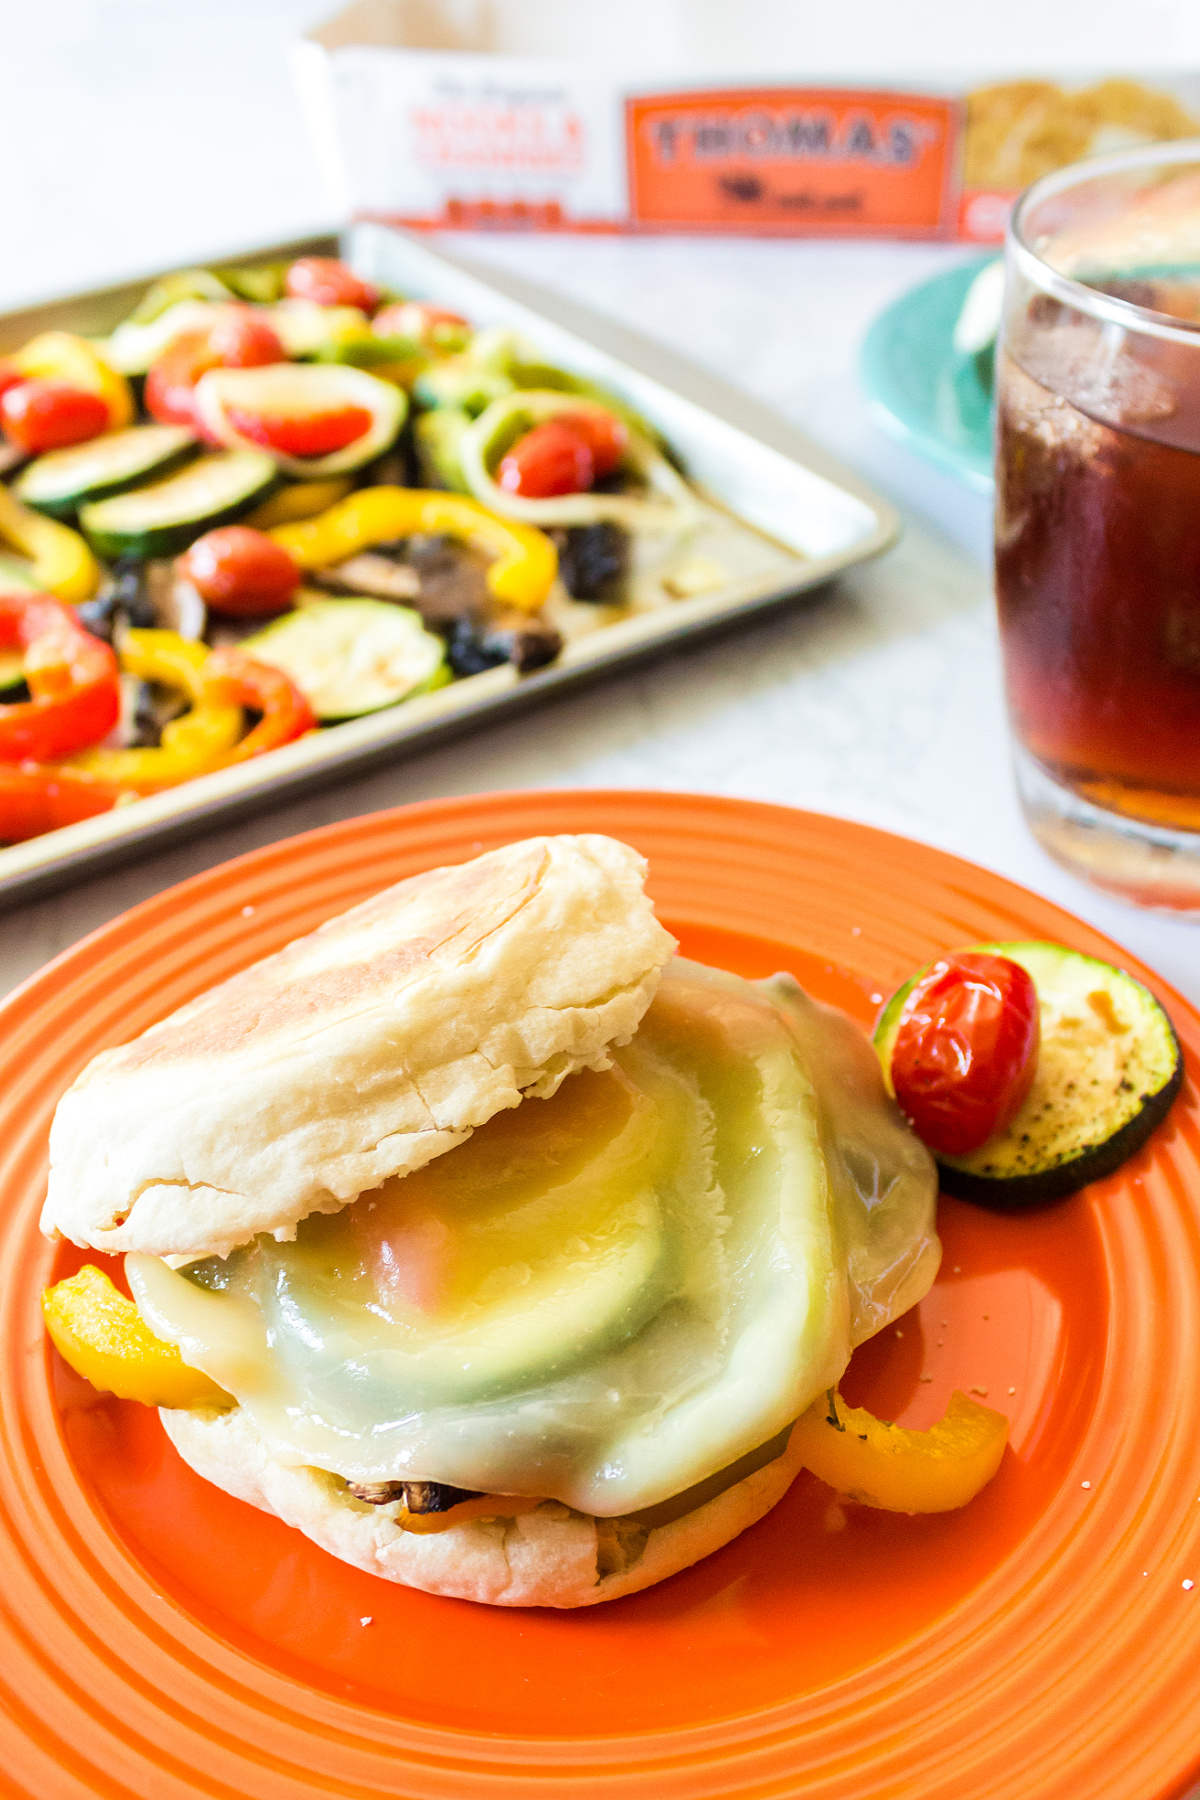 A sandwich with veggies and cheese on an English muffin, served on an orange plate with a side of roasted vegetables and a cold beverage.